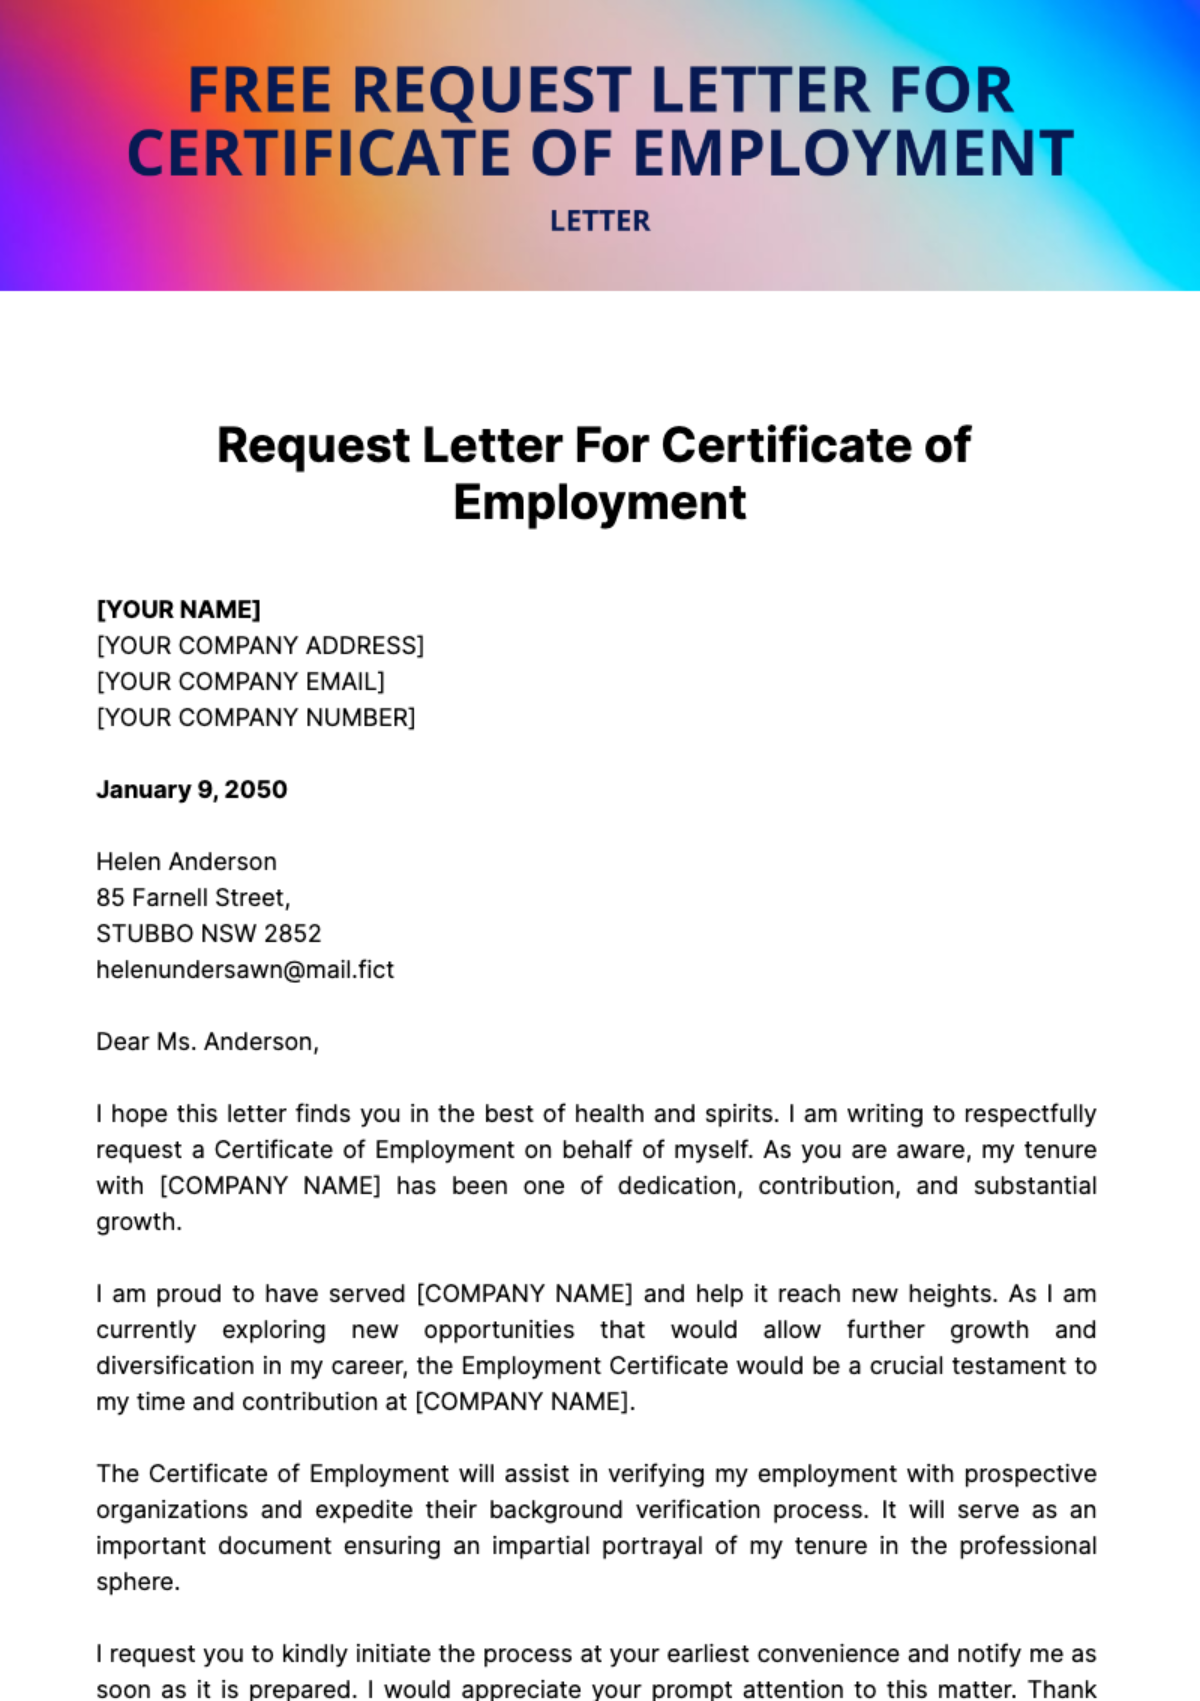 Free Request Letter for Certificate of Employment Template